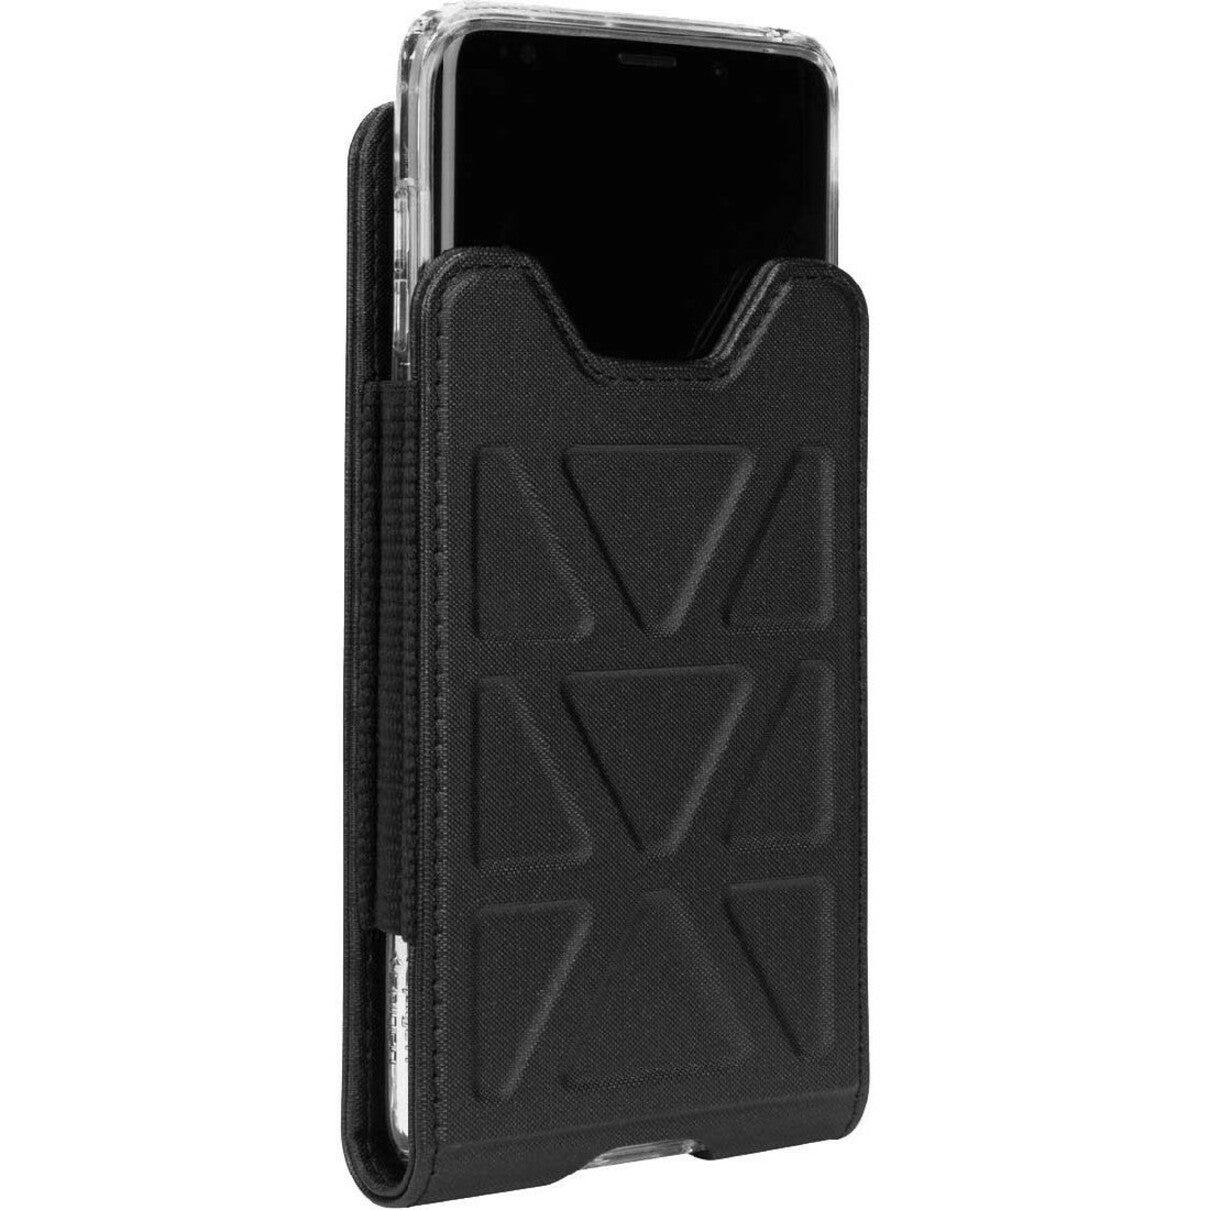 Targus TFD151GLZ Field-Ready Universal Holster for 4.7" Smartphones, Belt Clip, Bump and Scratch Resistant, Black